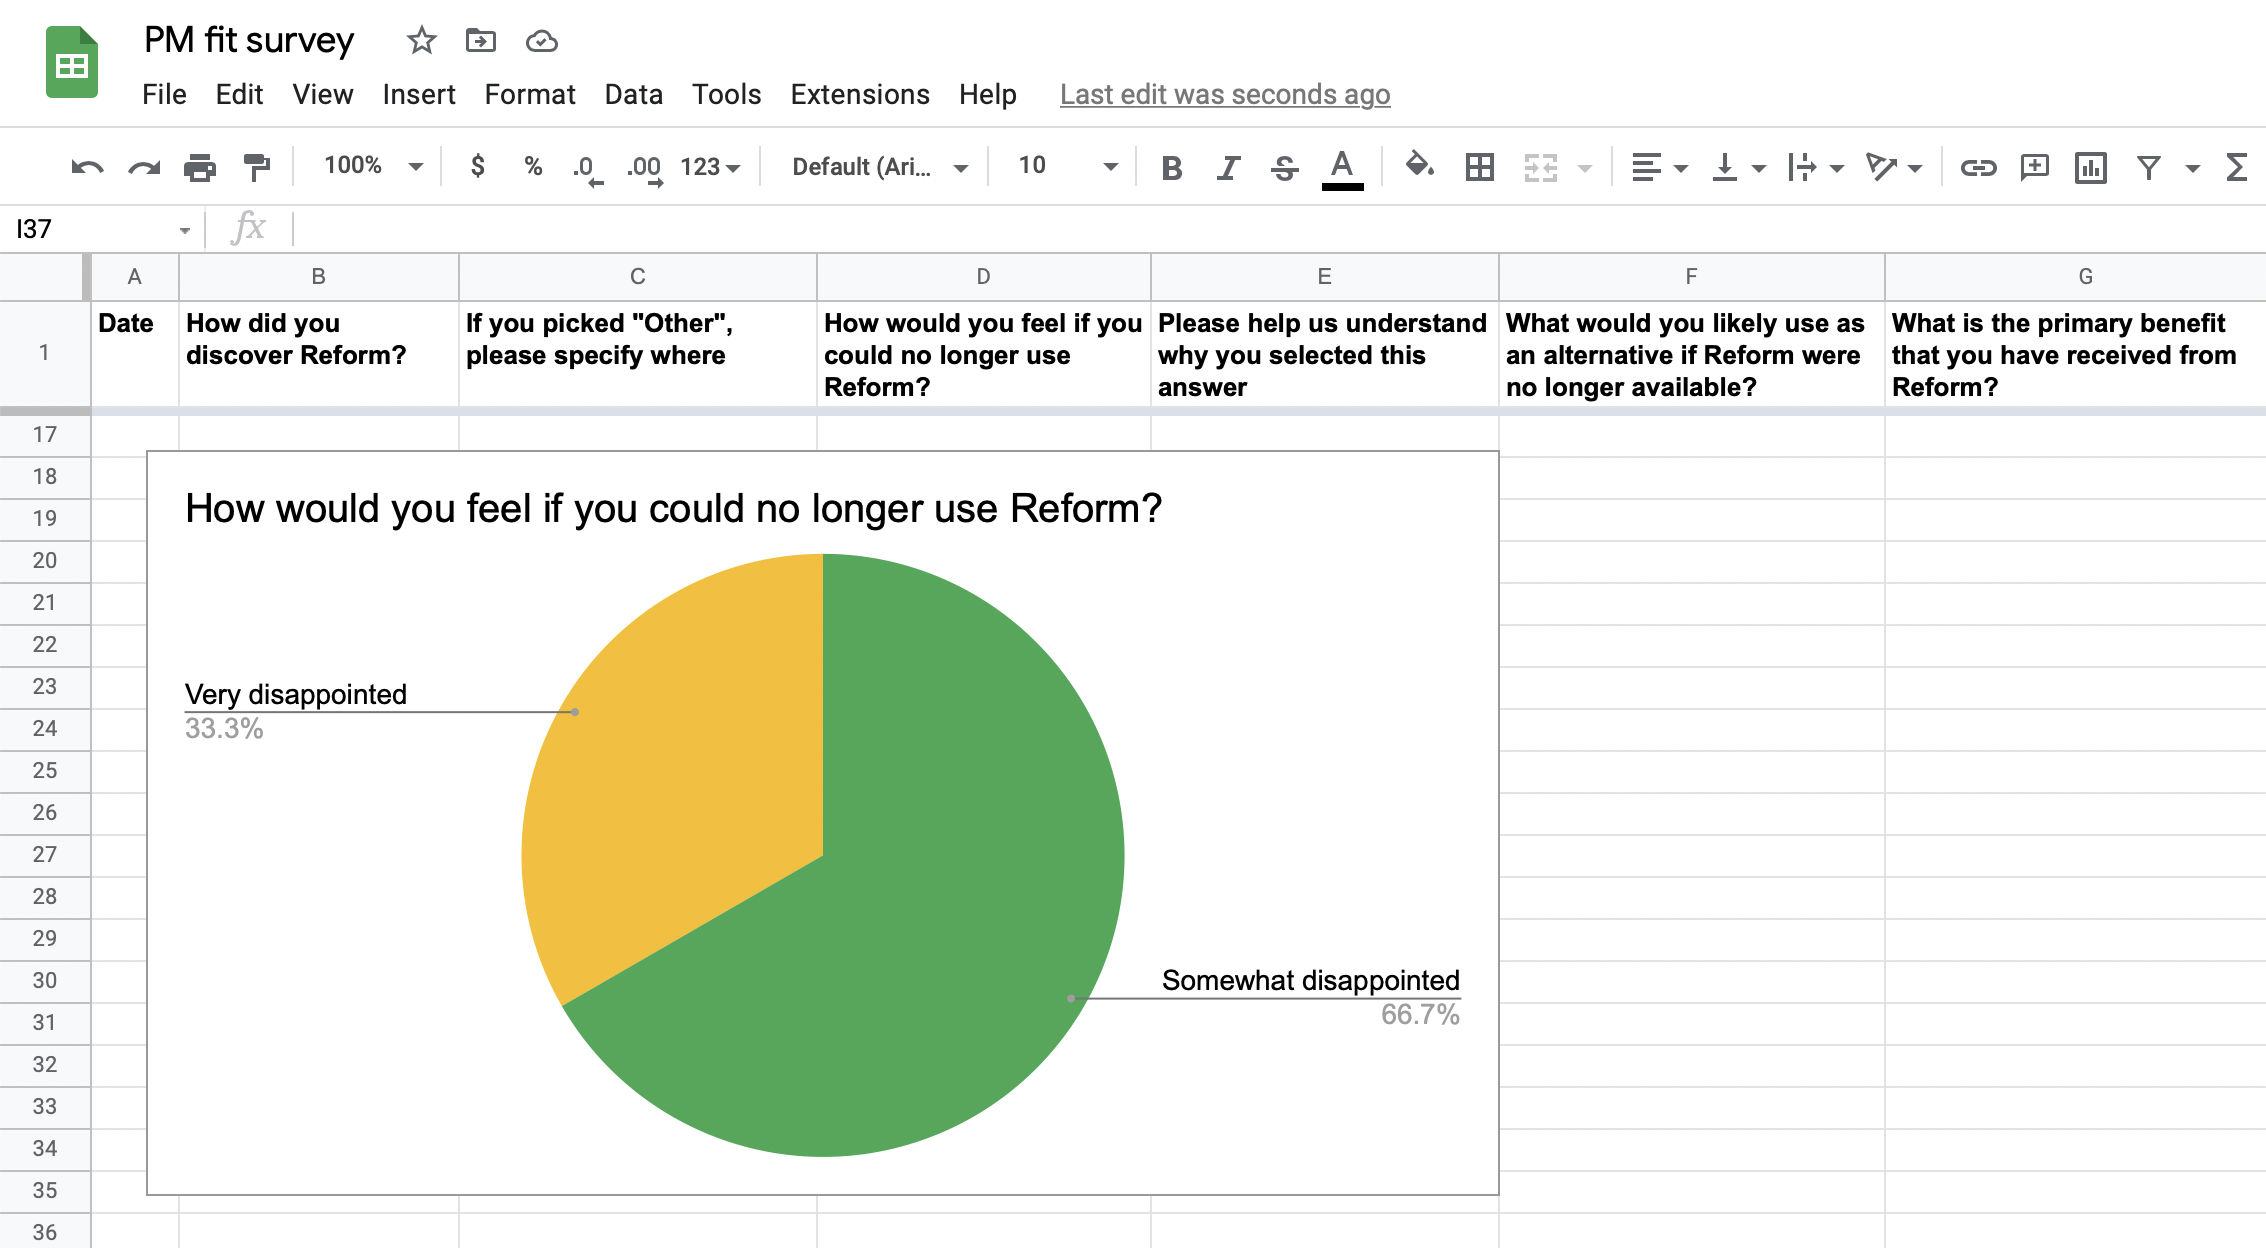 Google sheet with Product-Market fit survey results